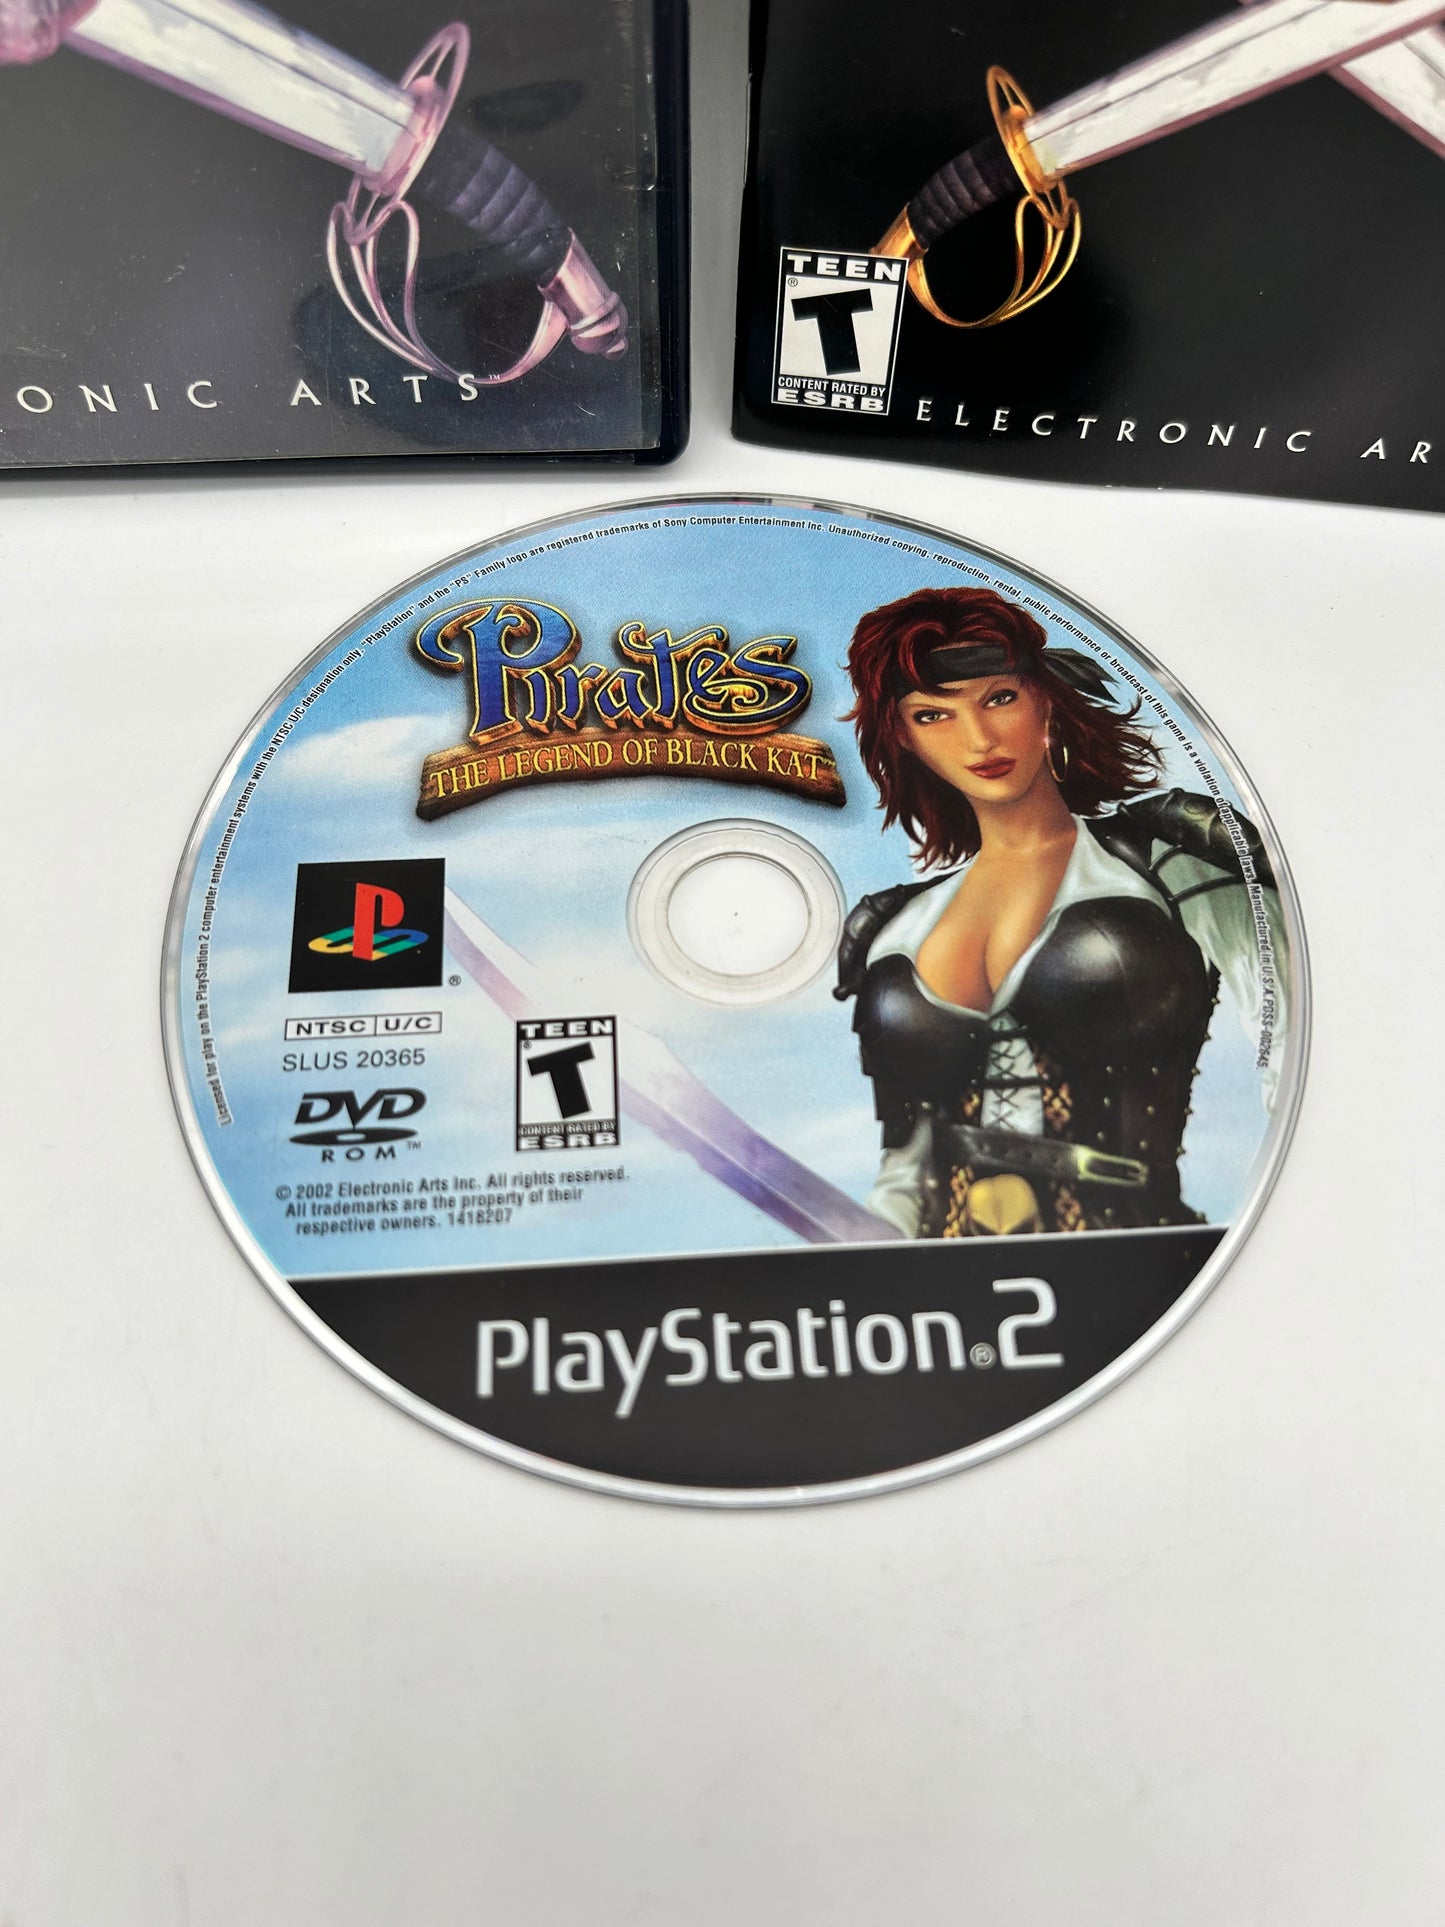 SONY PLAYSTATiON 2 [PS2] | PiRATES THE LEGEND OF BLACK KAT